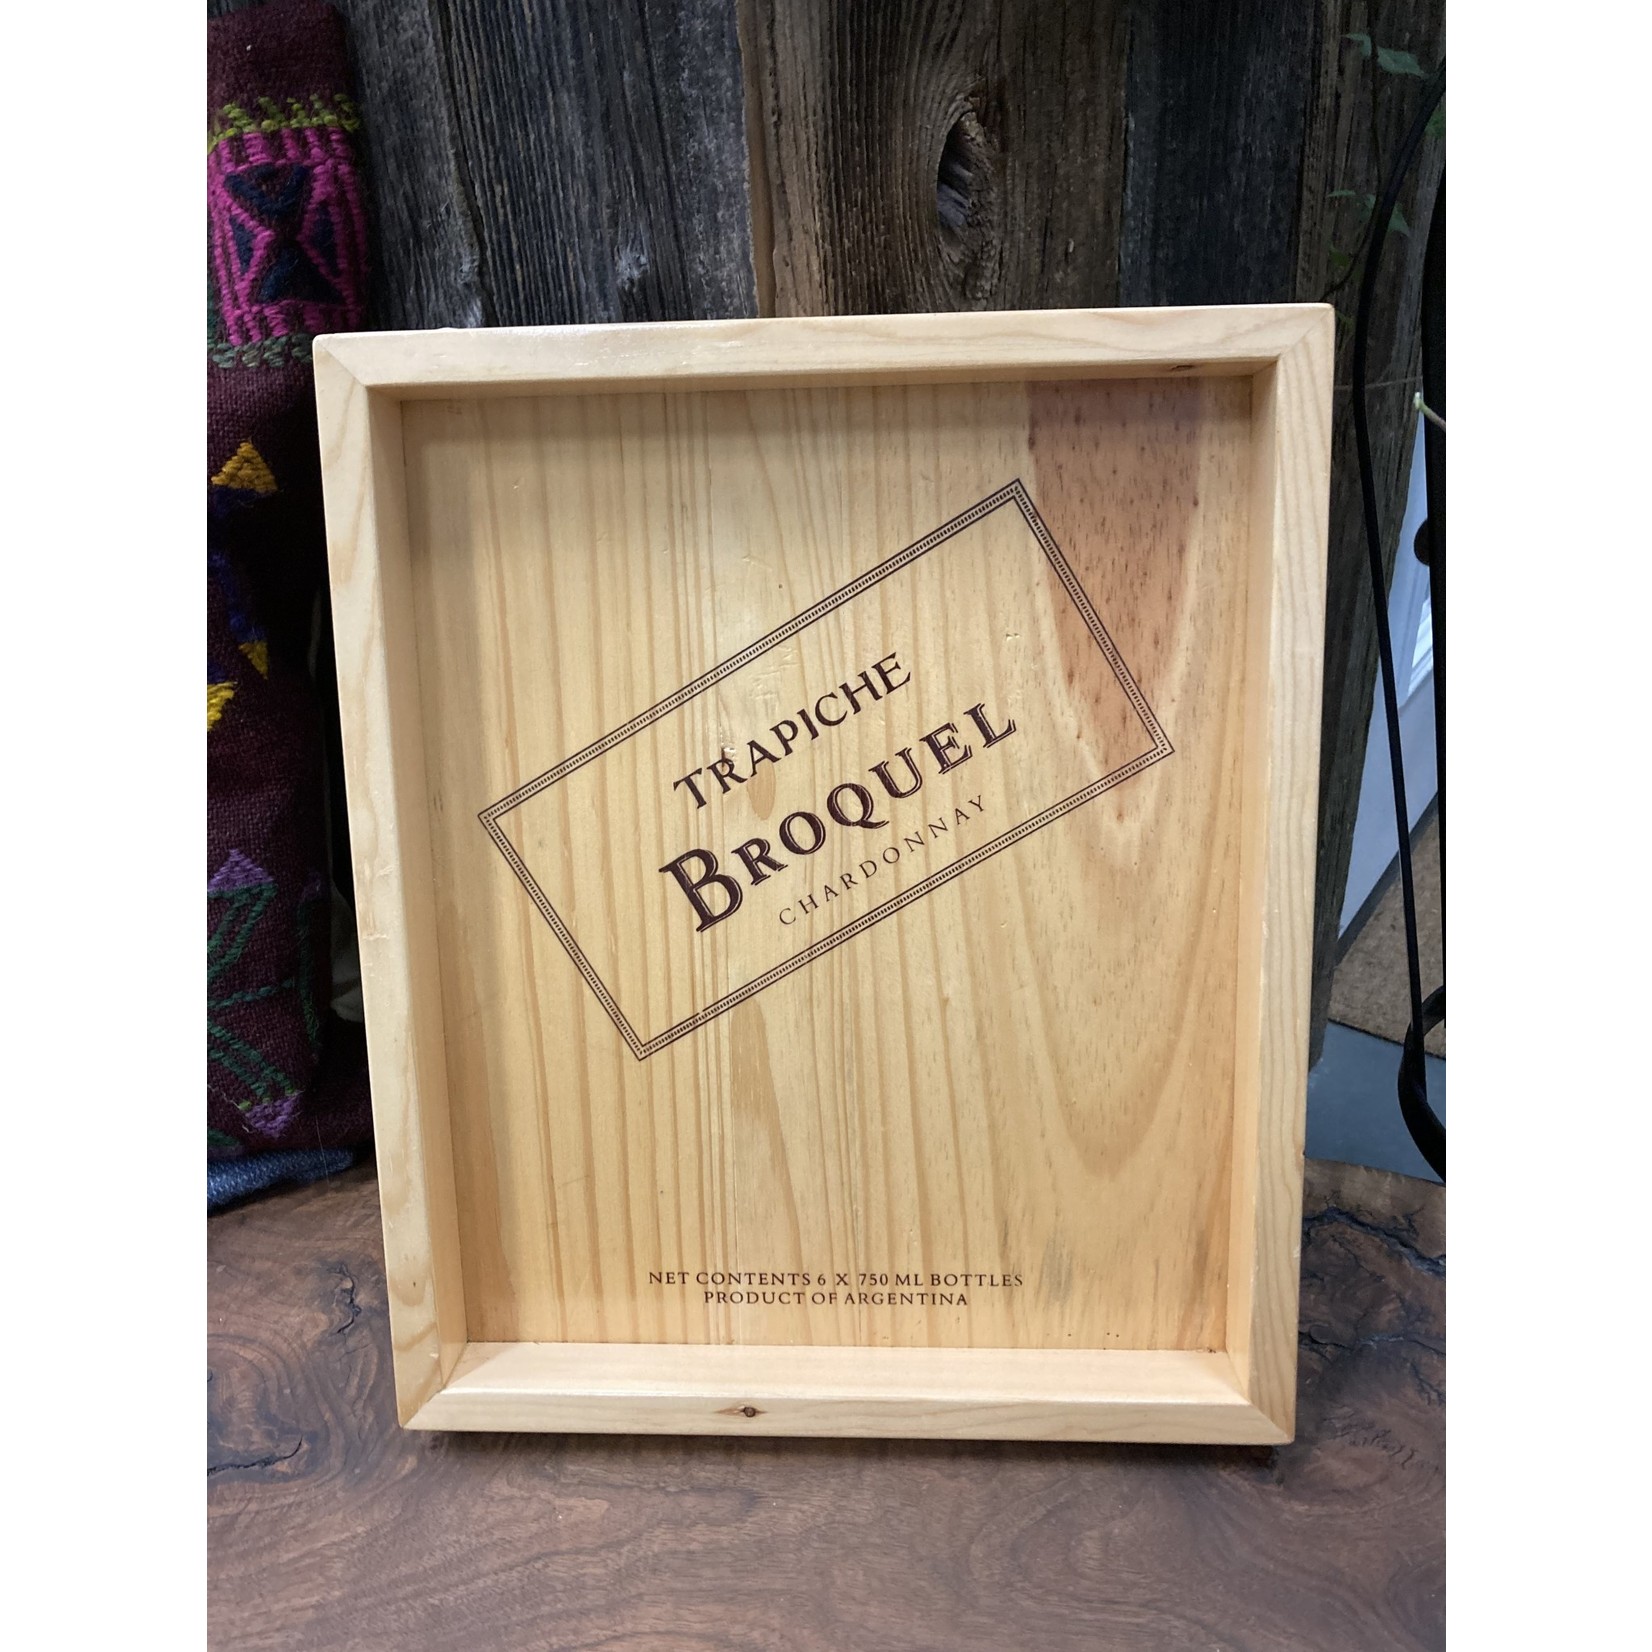 Susan Cowher Candles Uncorked | Trapiche Broquel Chardonnay Serving tray